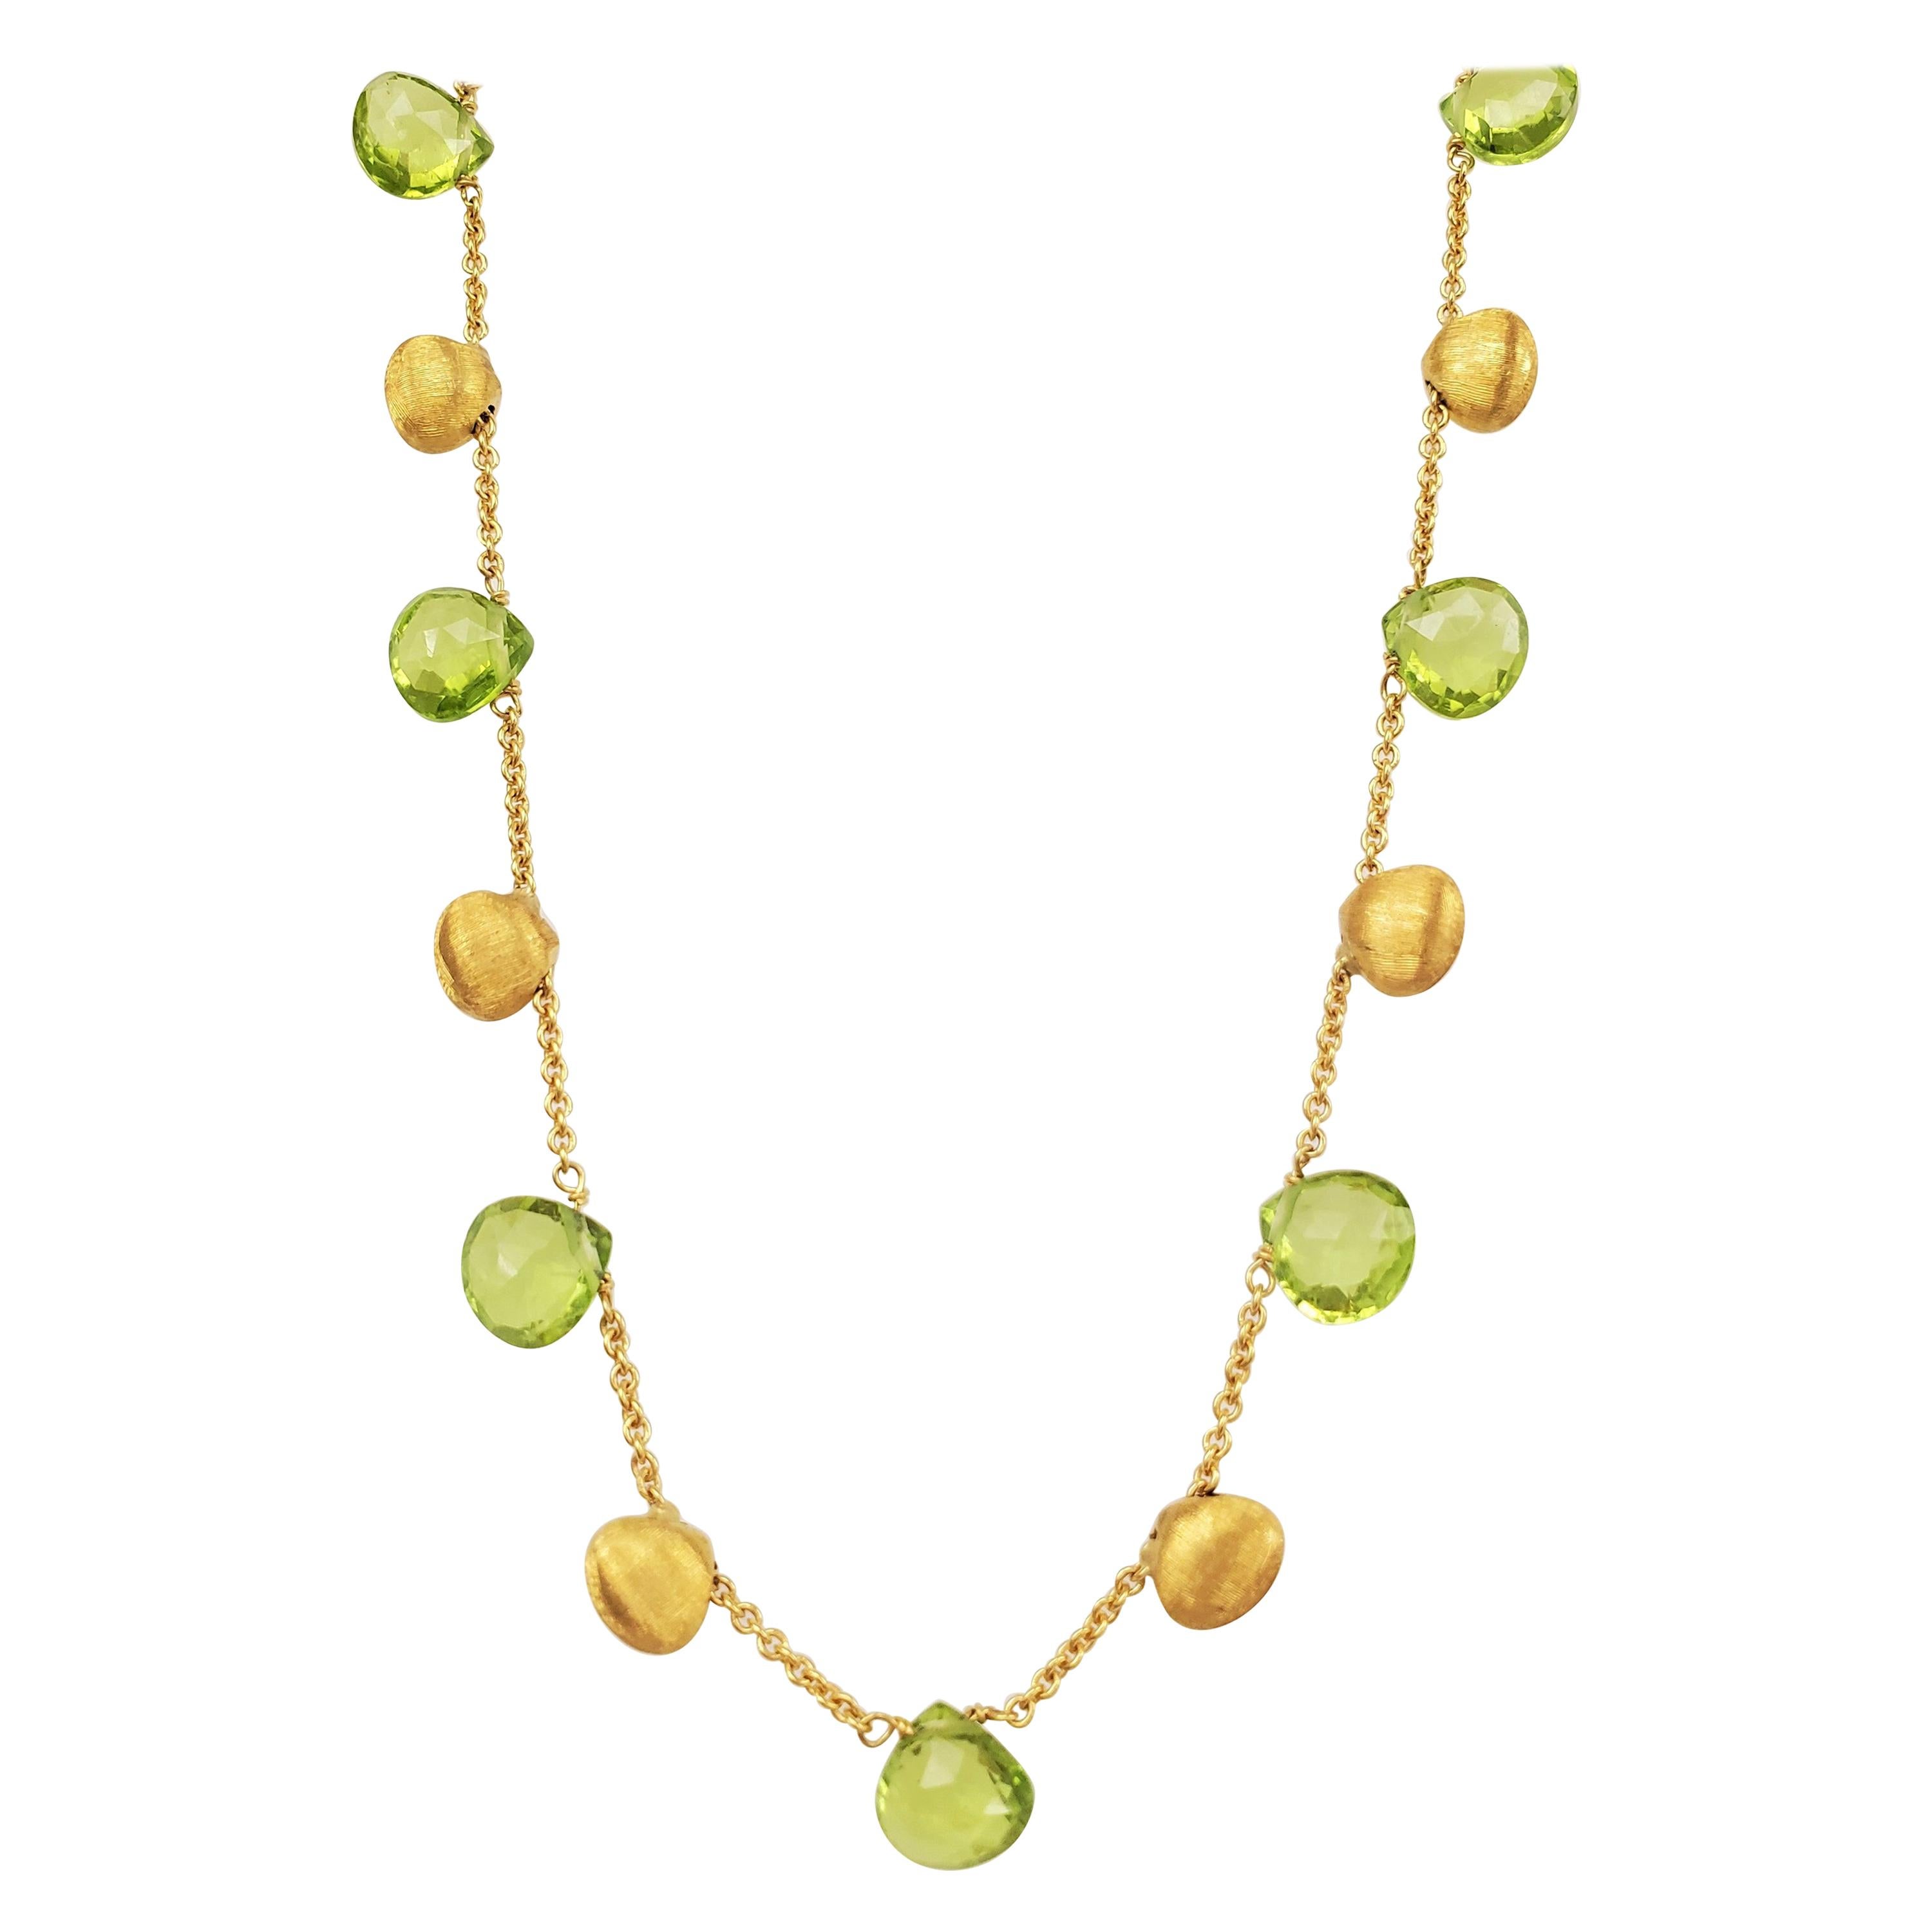 Marco Bicego Gold and Peridot Paradise Necklace